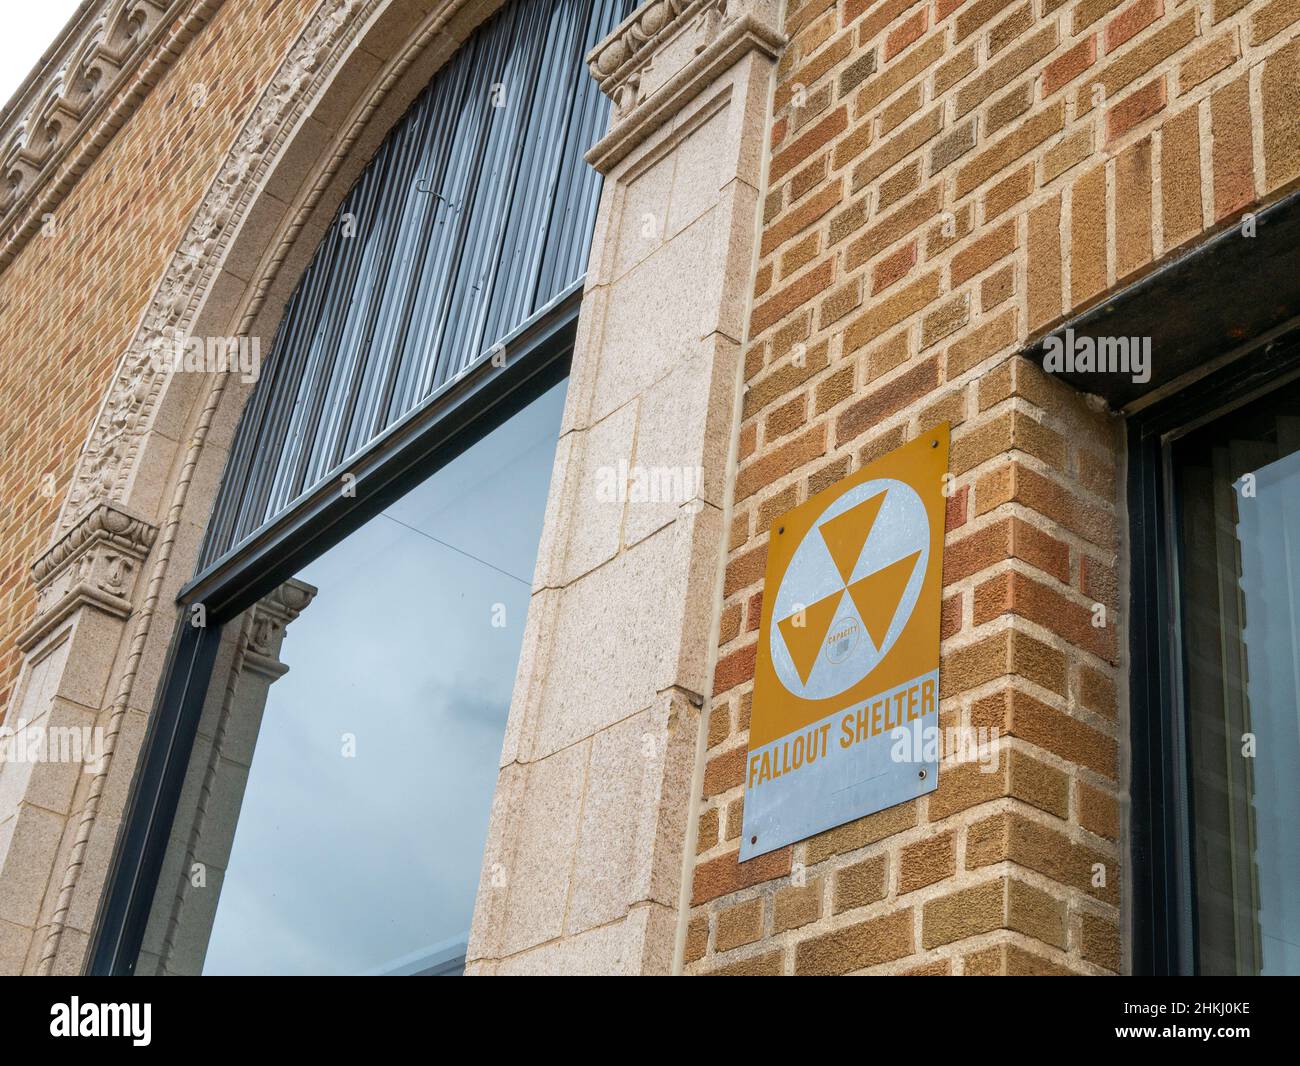 Old vintage fallout shelter sign on a brick exterior wall Stock Photo